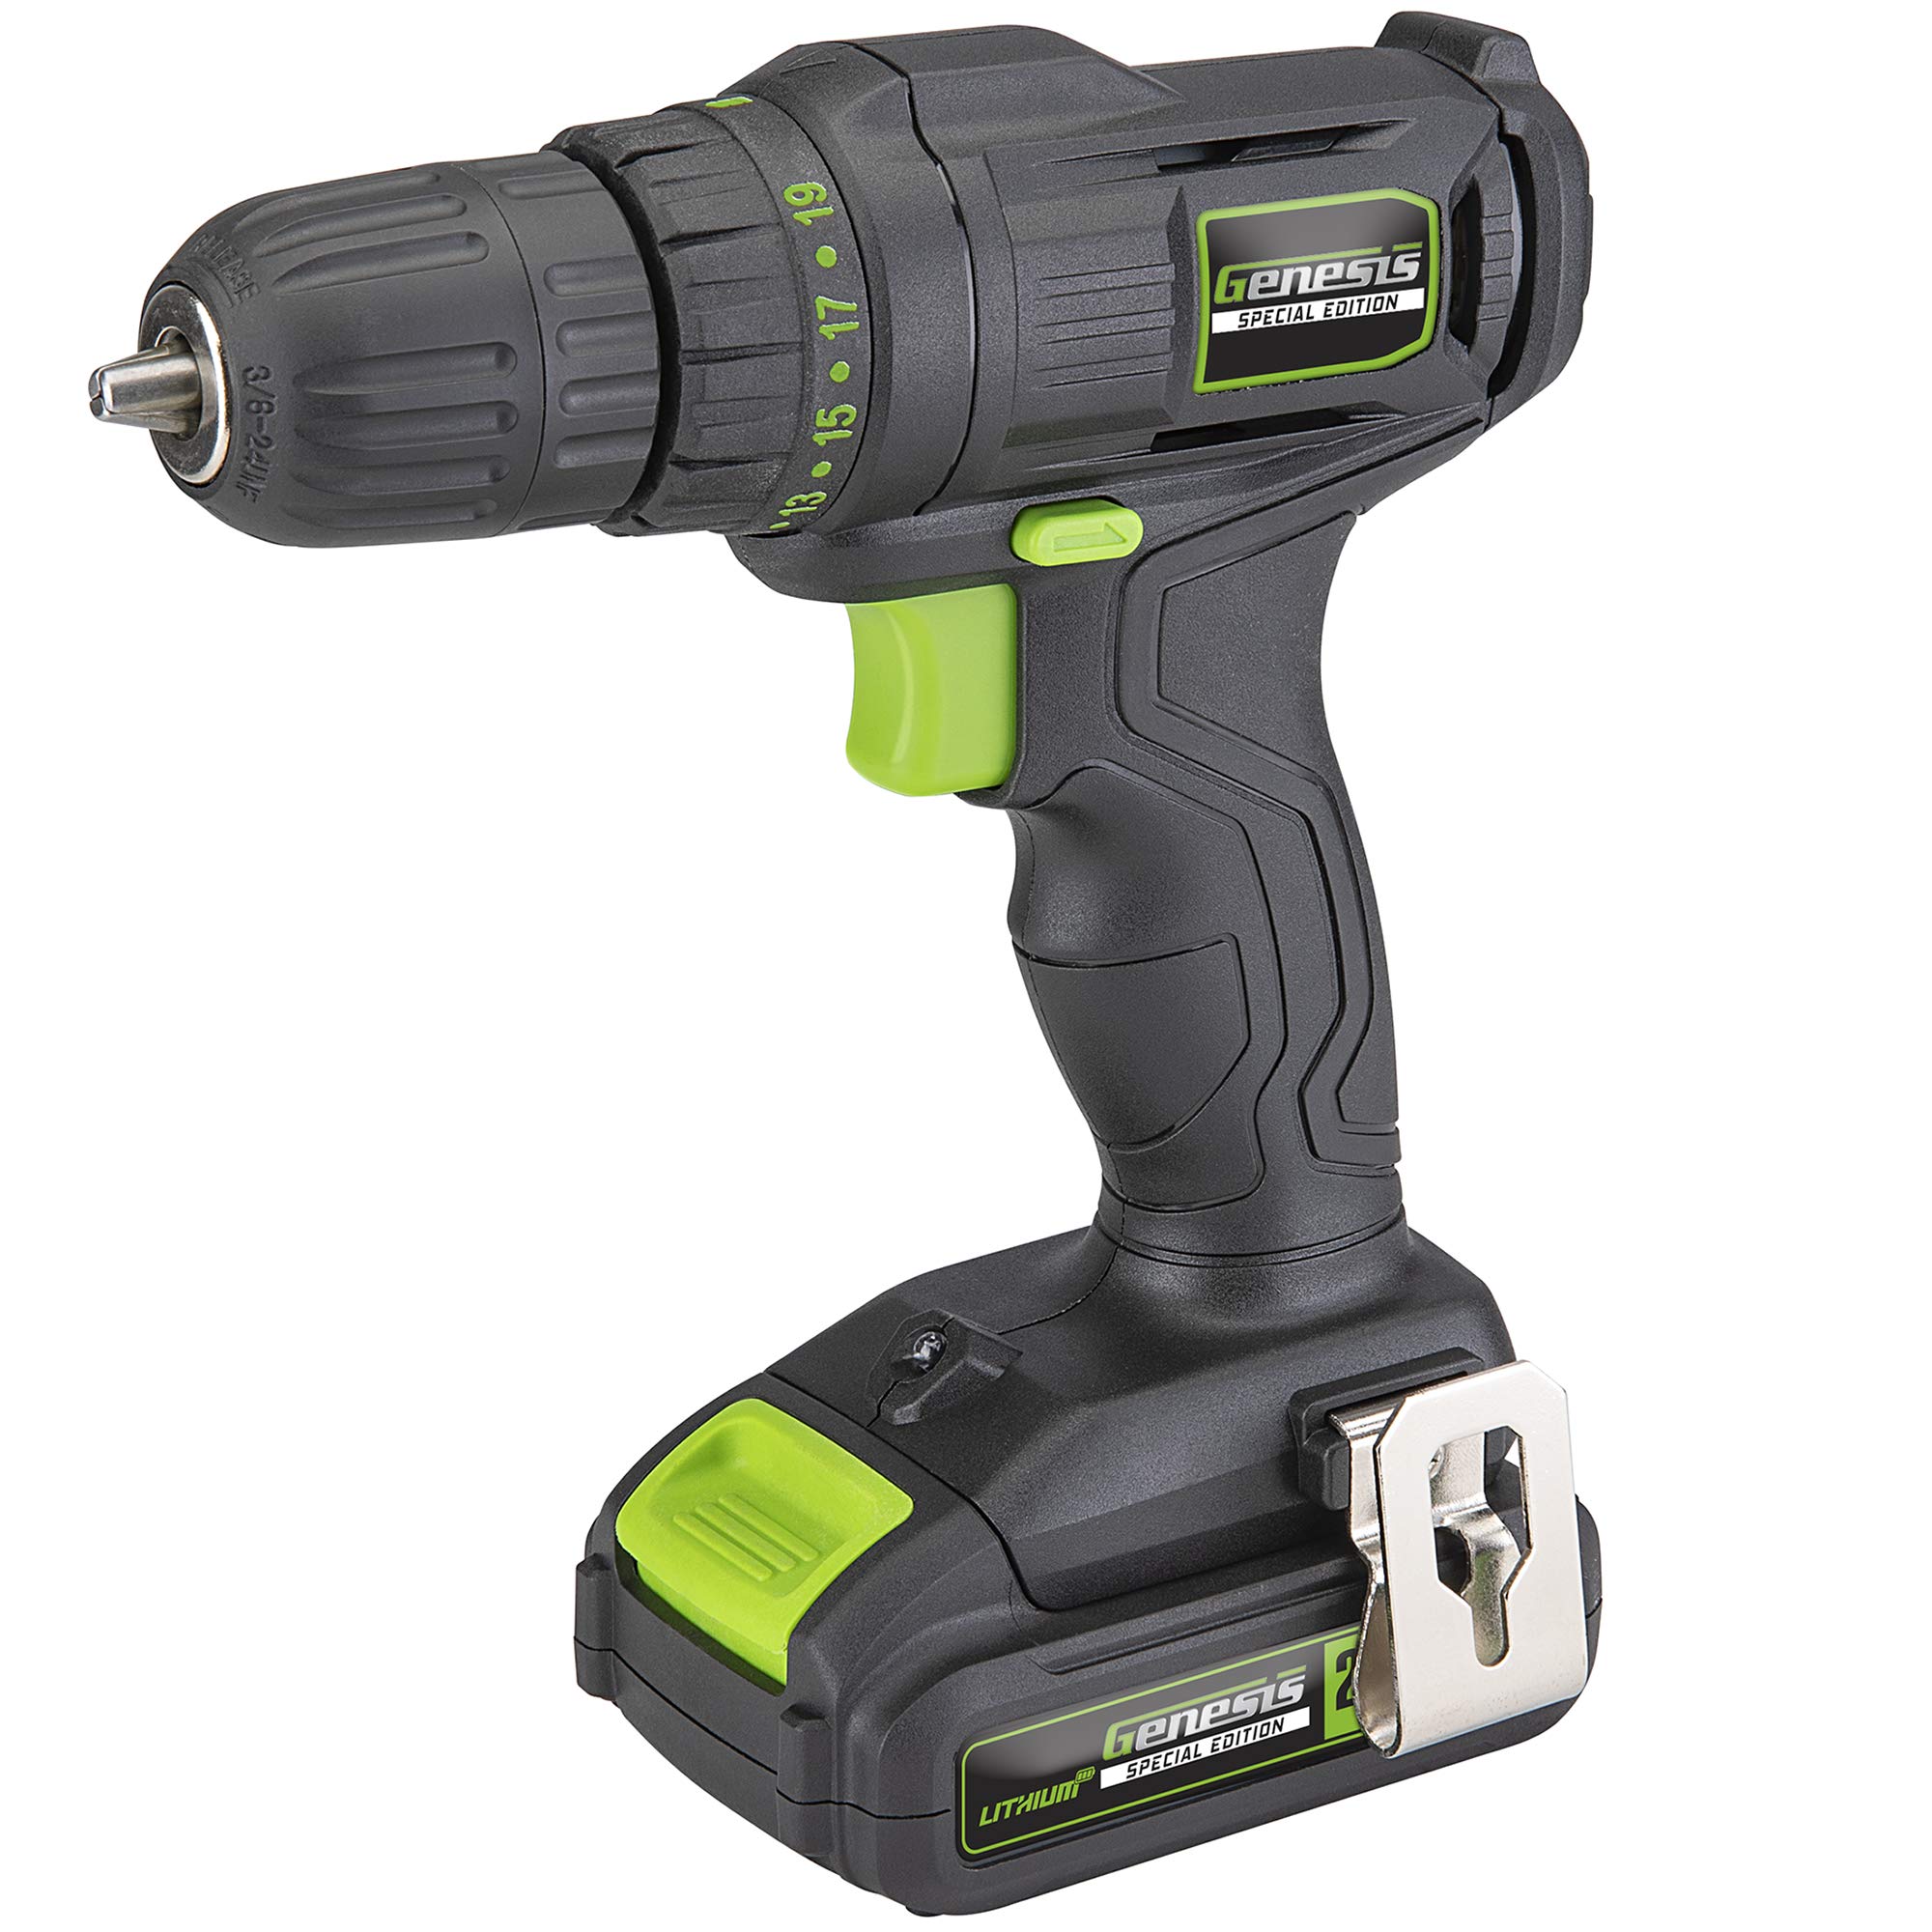 Genesis GLCD20CSE Special Edition 20V Lithium-Ion Cordless Drill/Driver with Built-in LED Light, 19+1 Torque Position Settings, Removable/Rechargeable Battery and Charger Included